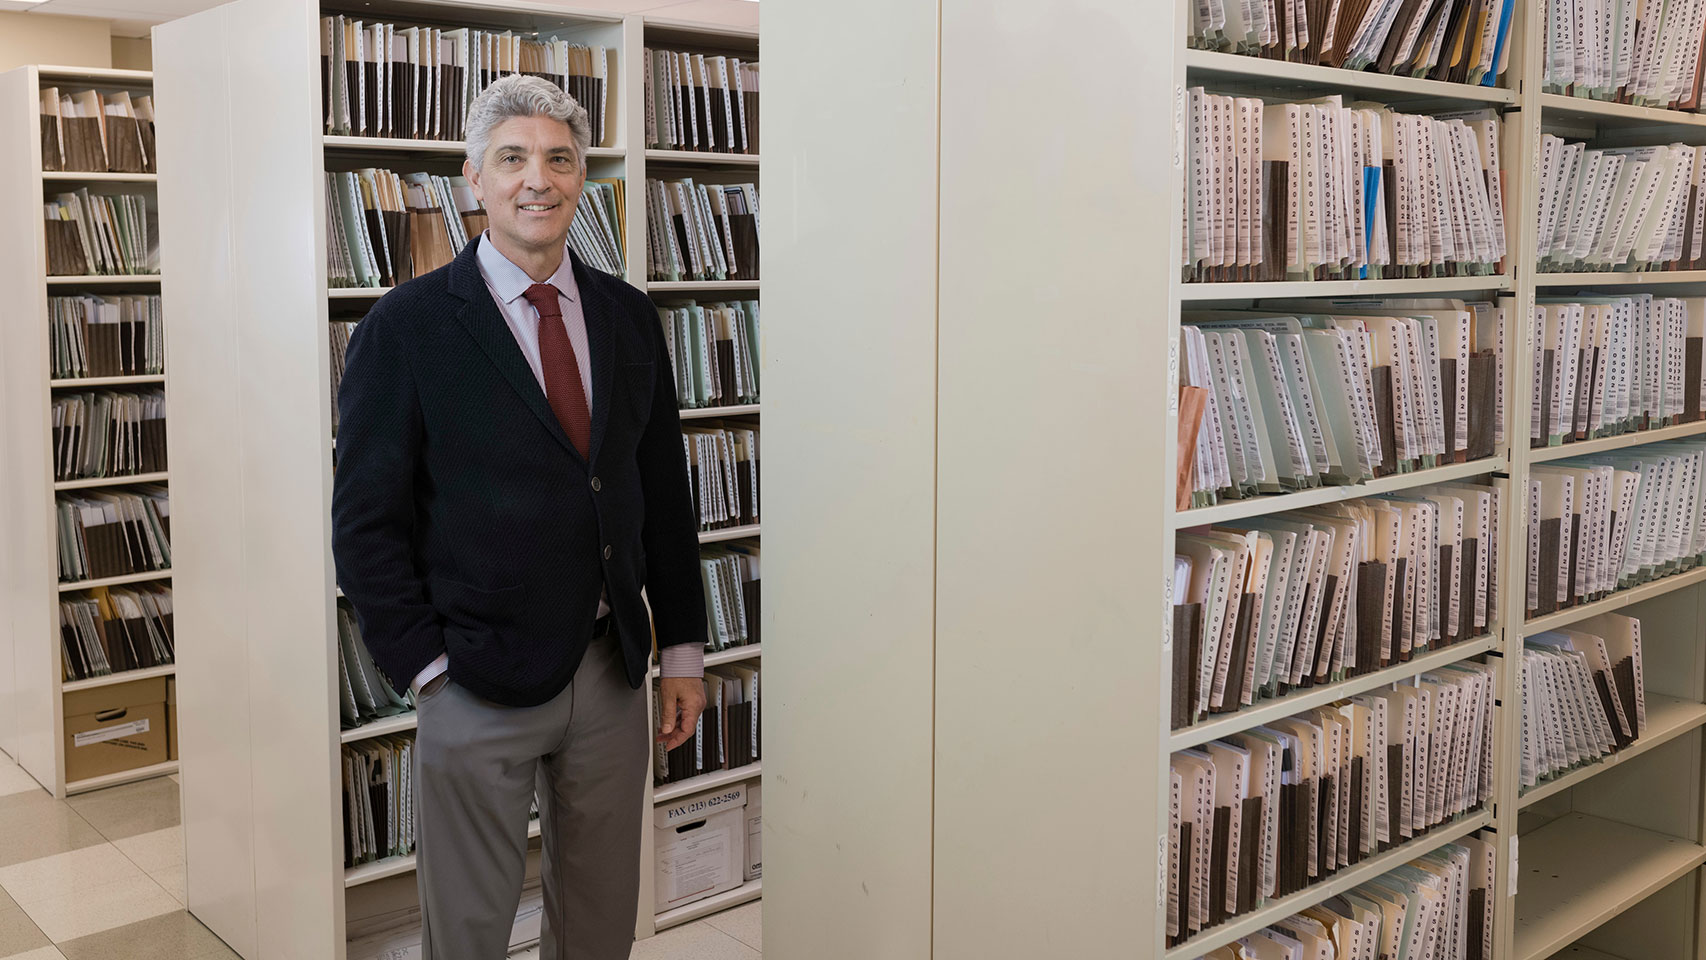 Man posing in a legal document file room